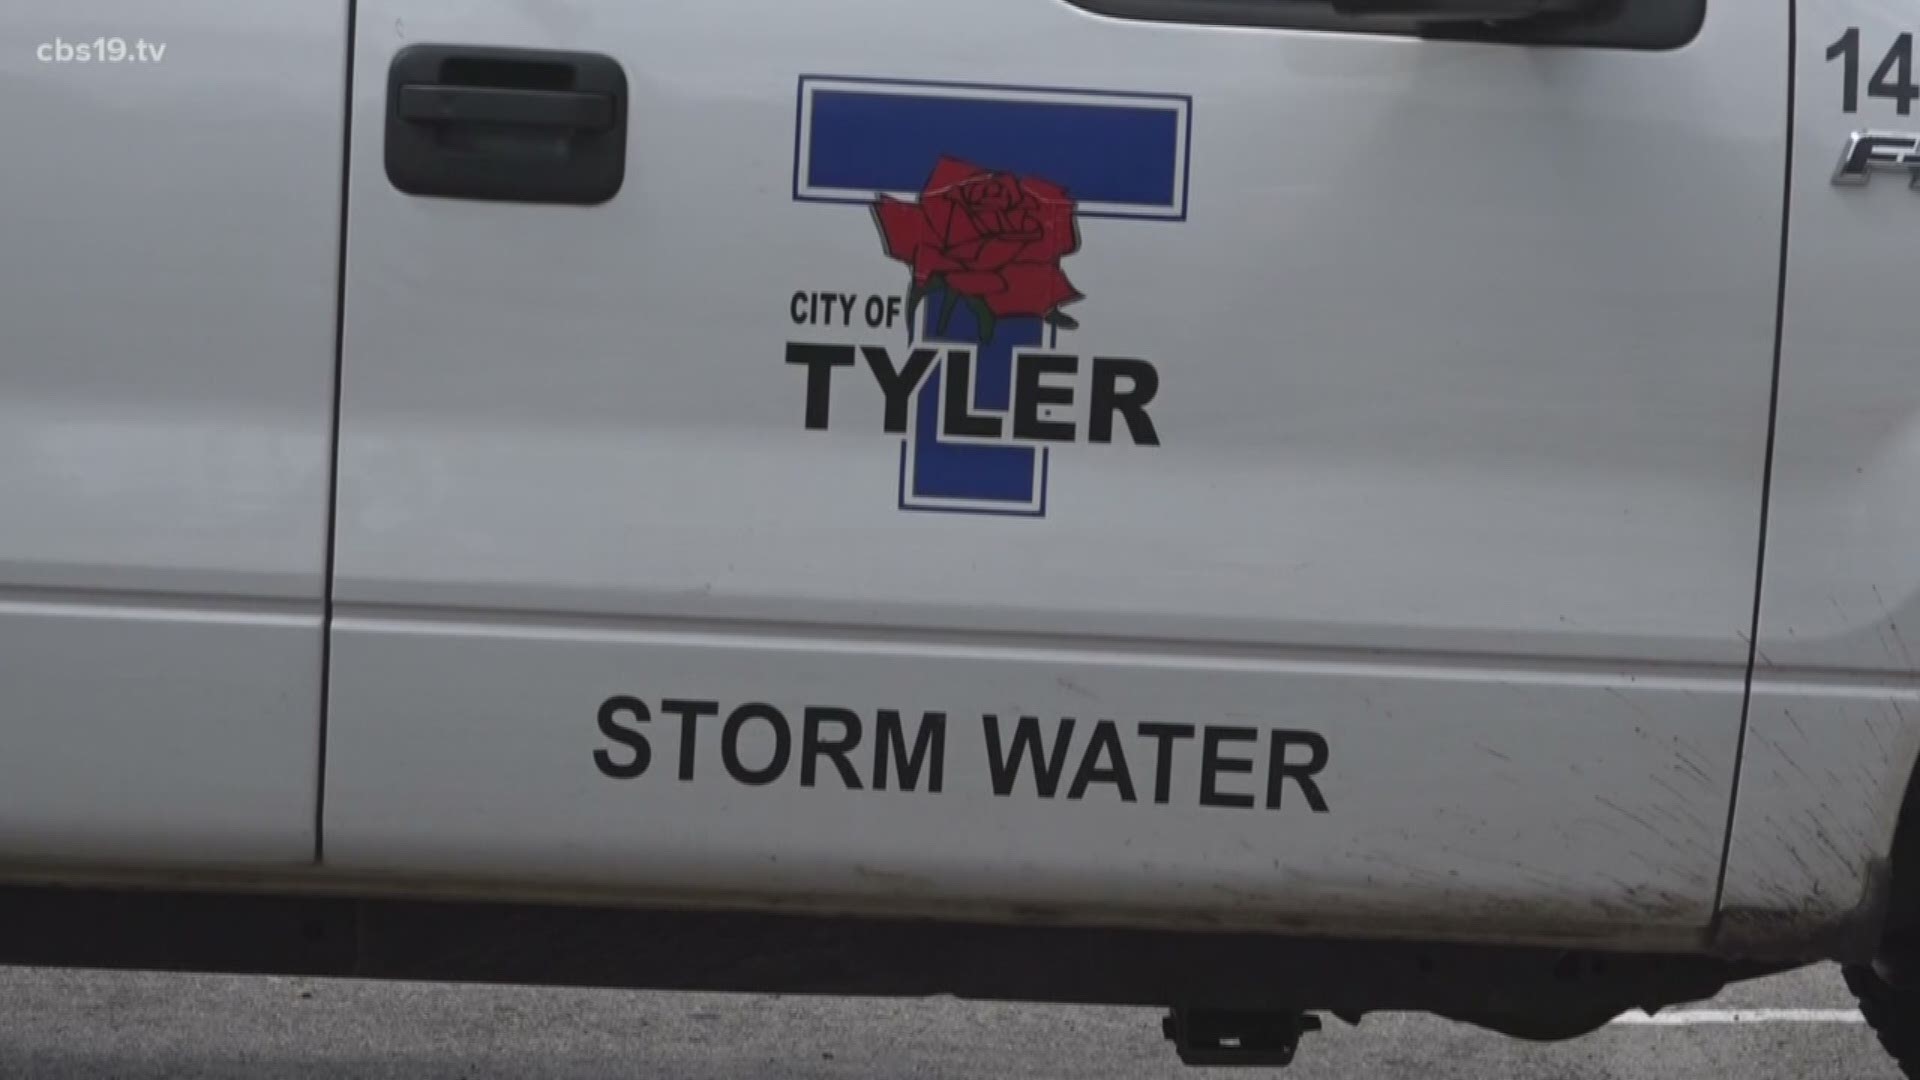 The Tyler City Council approved almost $5 million for repairs to its wastewater collection system.